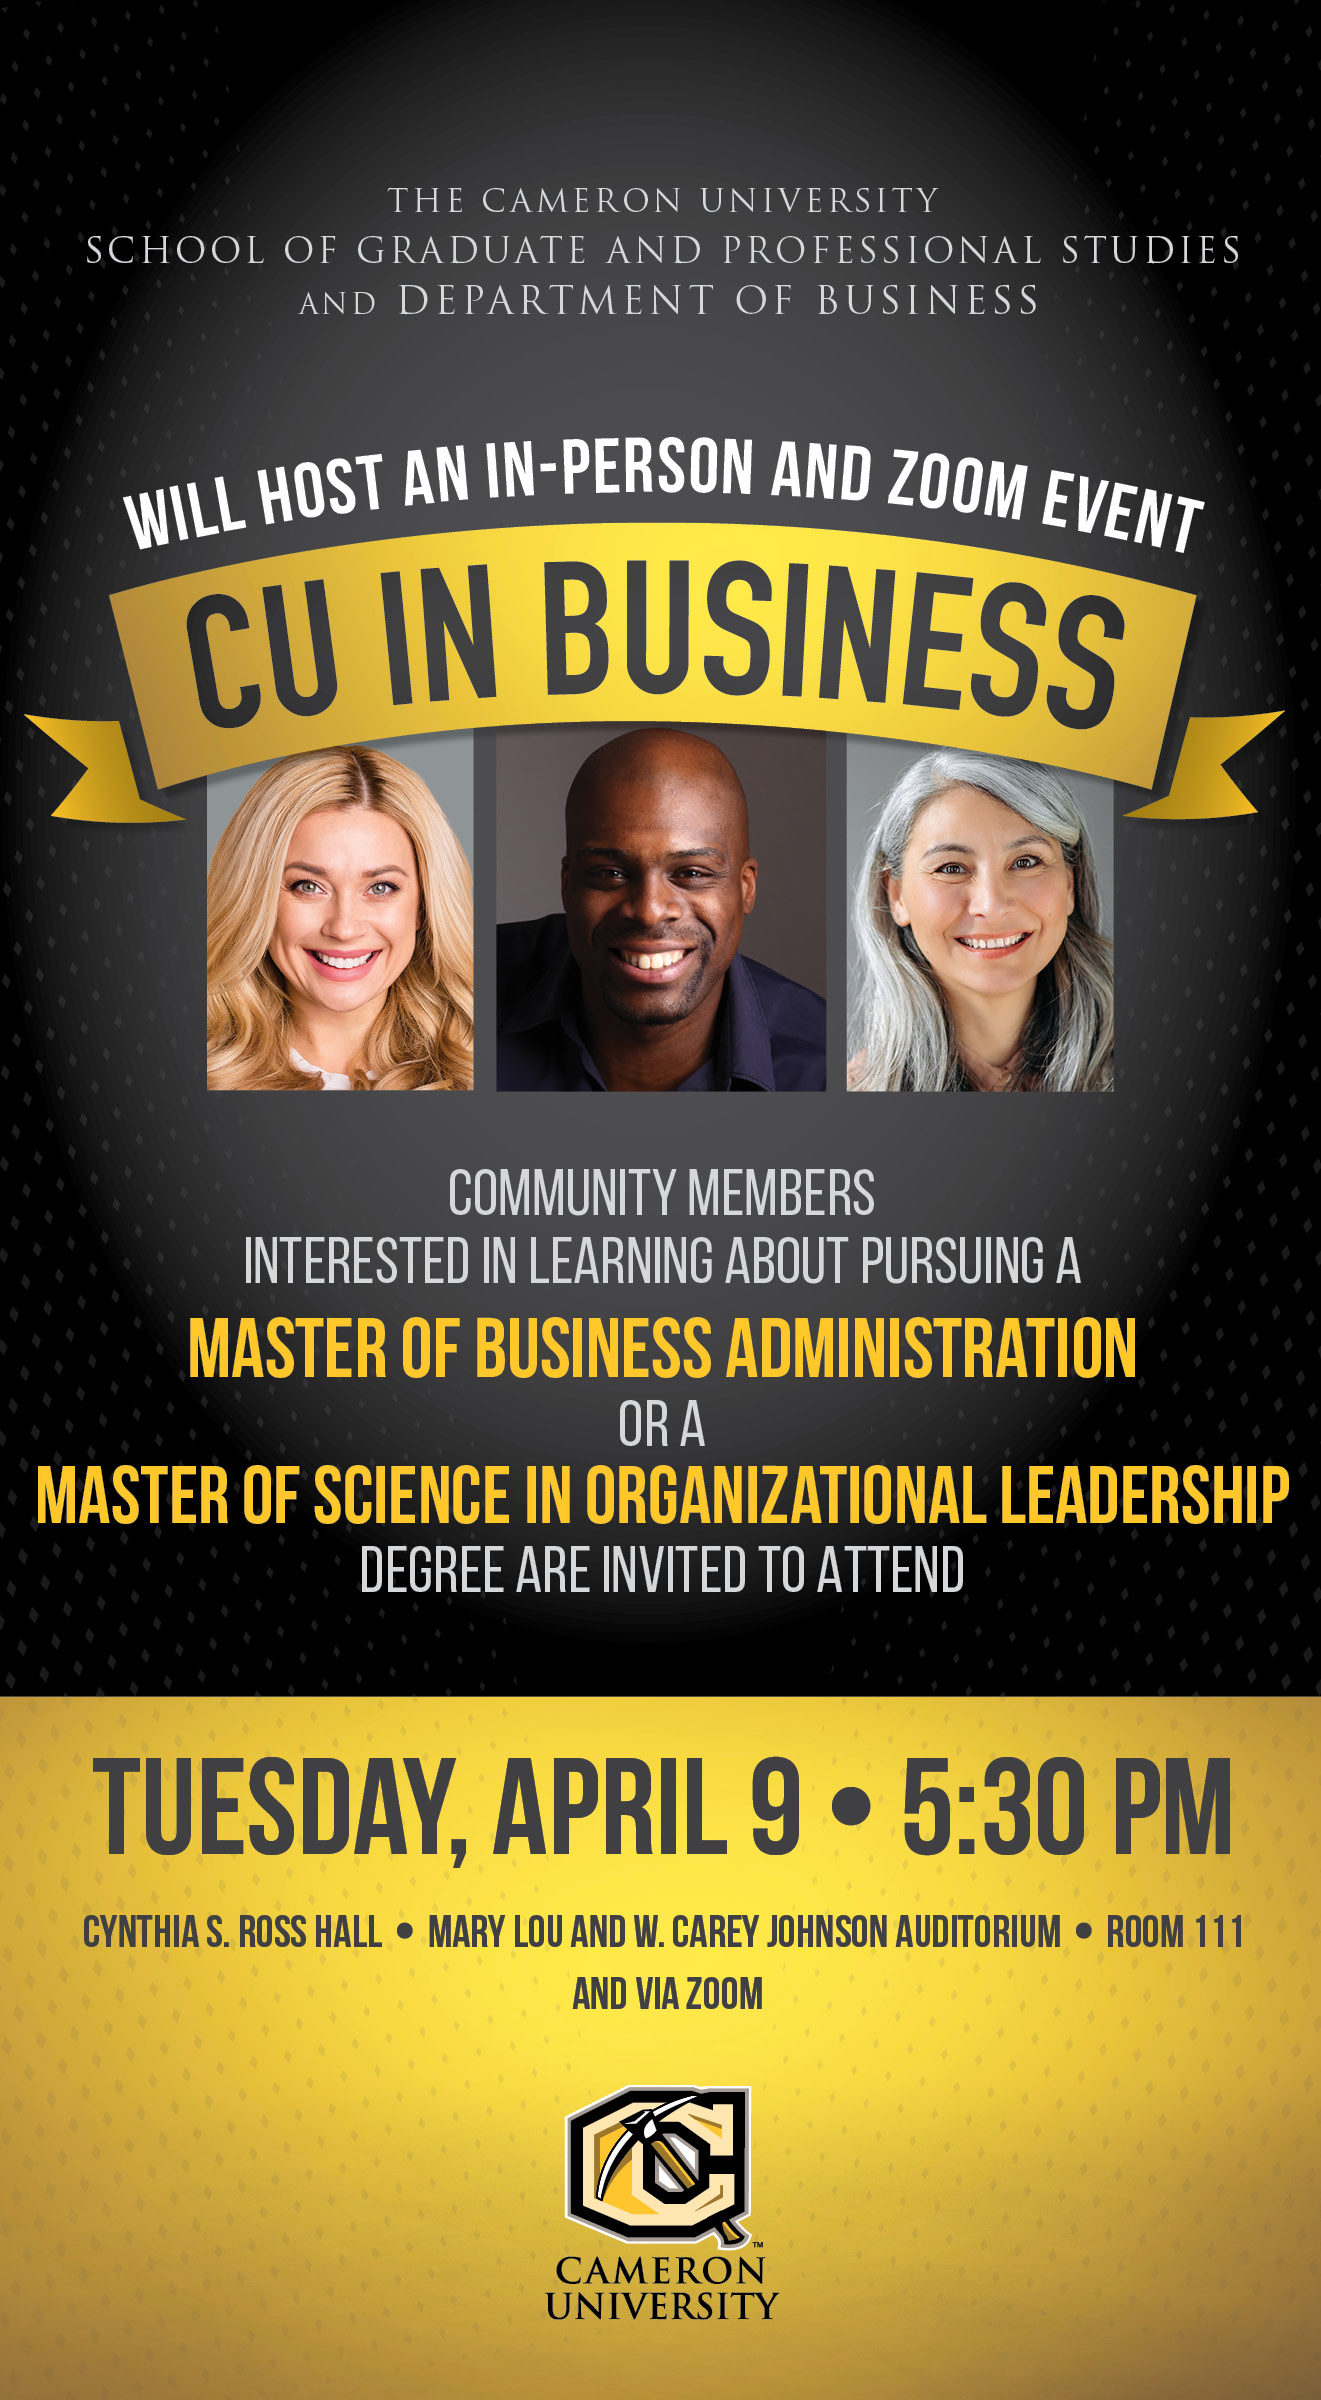 The Cameron University School of Graduate and Professional Studies and Department of Business will host an in-person and Zoom event
CU in Business
Community members interested in learning about pursuing a Master of Business Administration or a Master of Science in Organizational Leadership degree are invited to attend.
Tuesday, April 9, 5:30 p.m.
Cynthia S. Ross Hall, Mary Lou and W. Carey Johnson Auditorium Room 111
and via Zoom